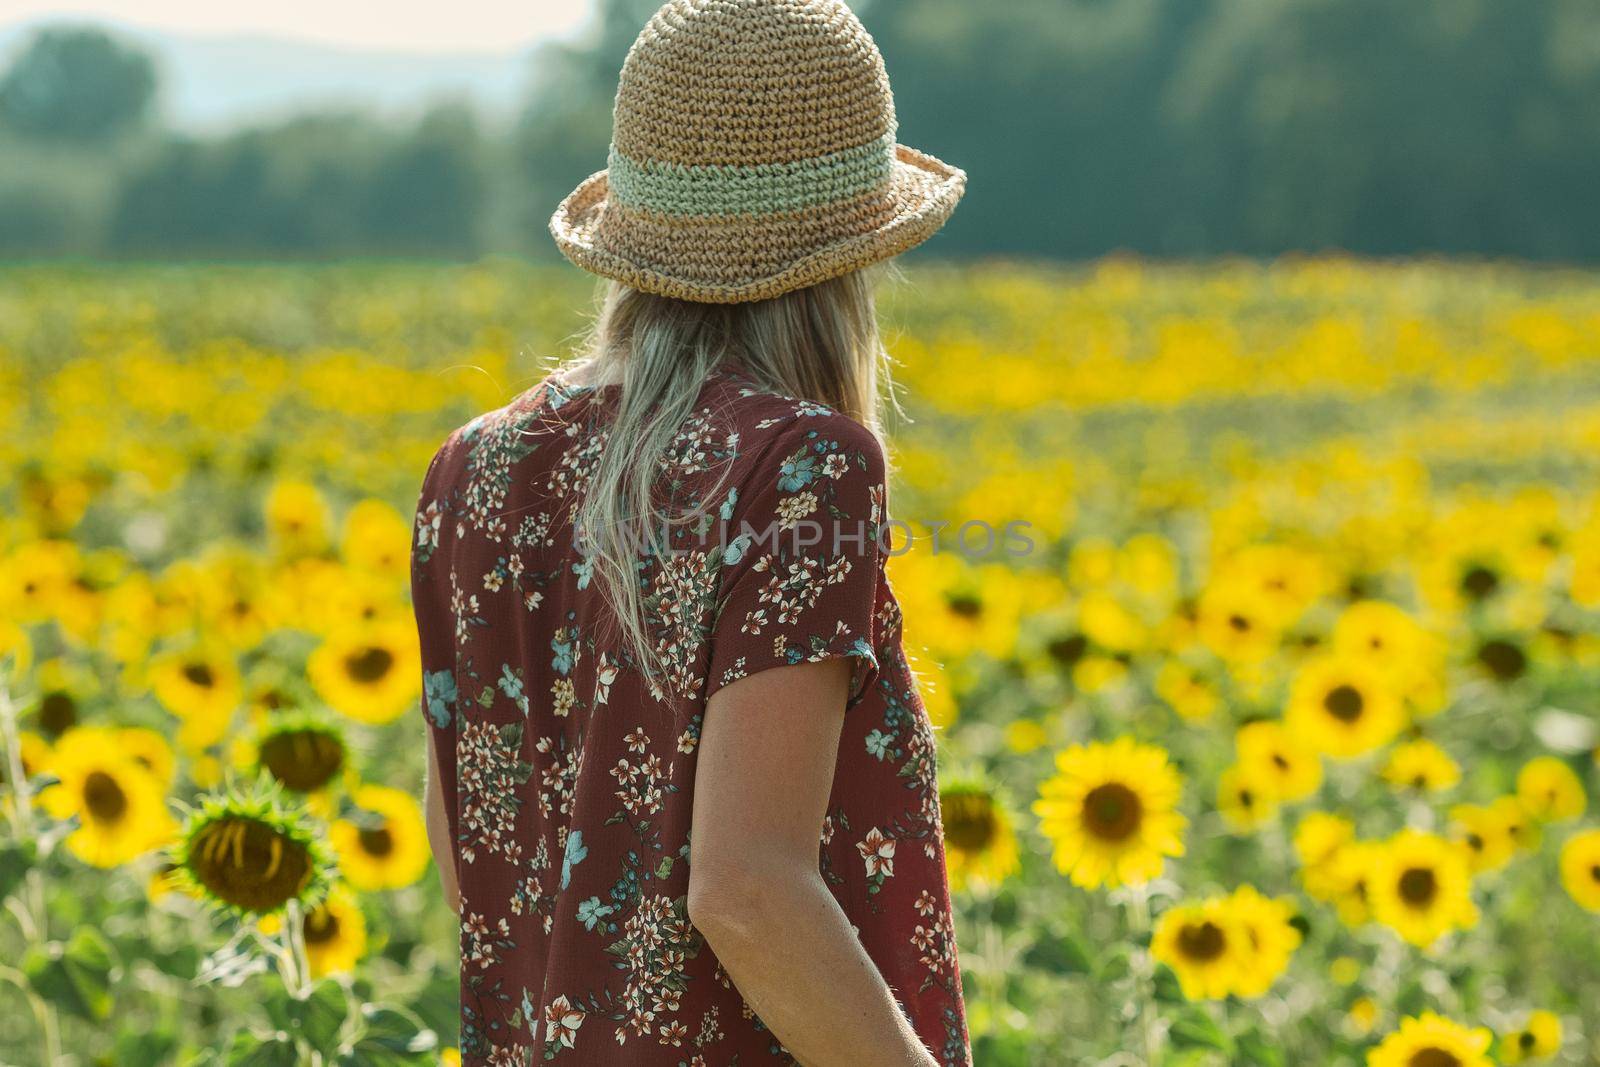 Woman among the sunflowers receive the beautiful afternoon sun. by martinscphoto